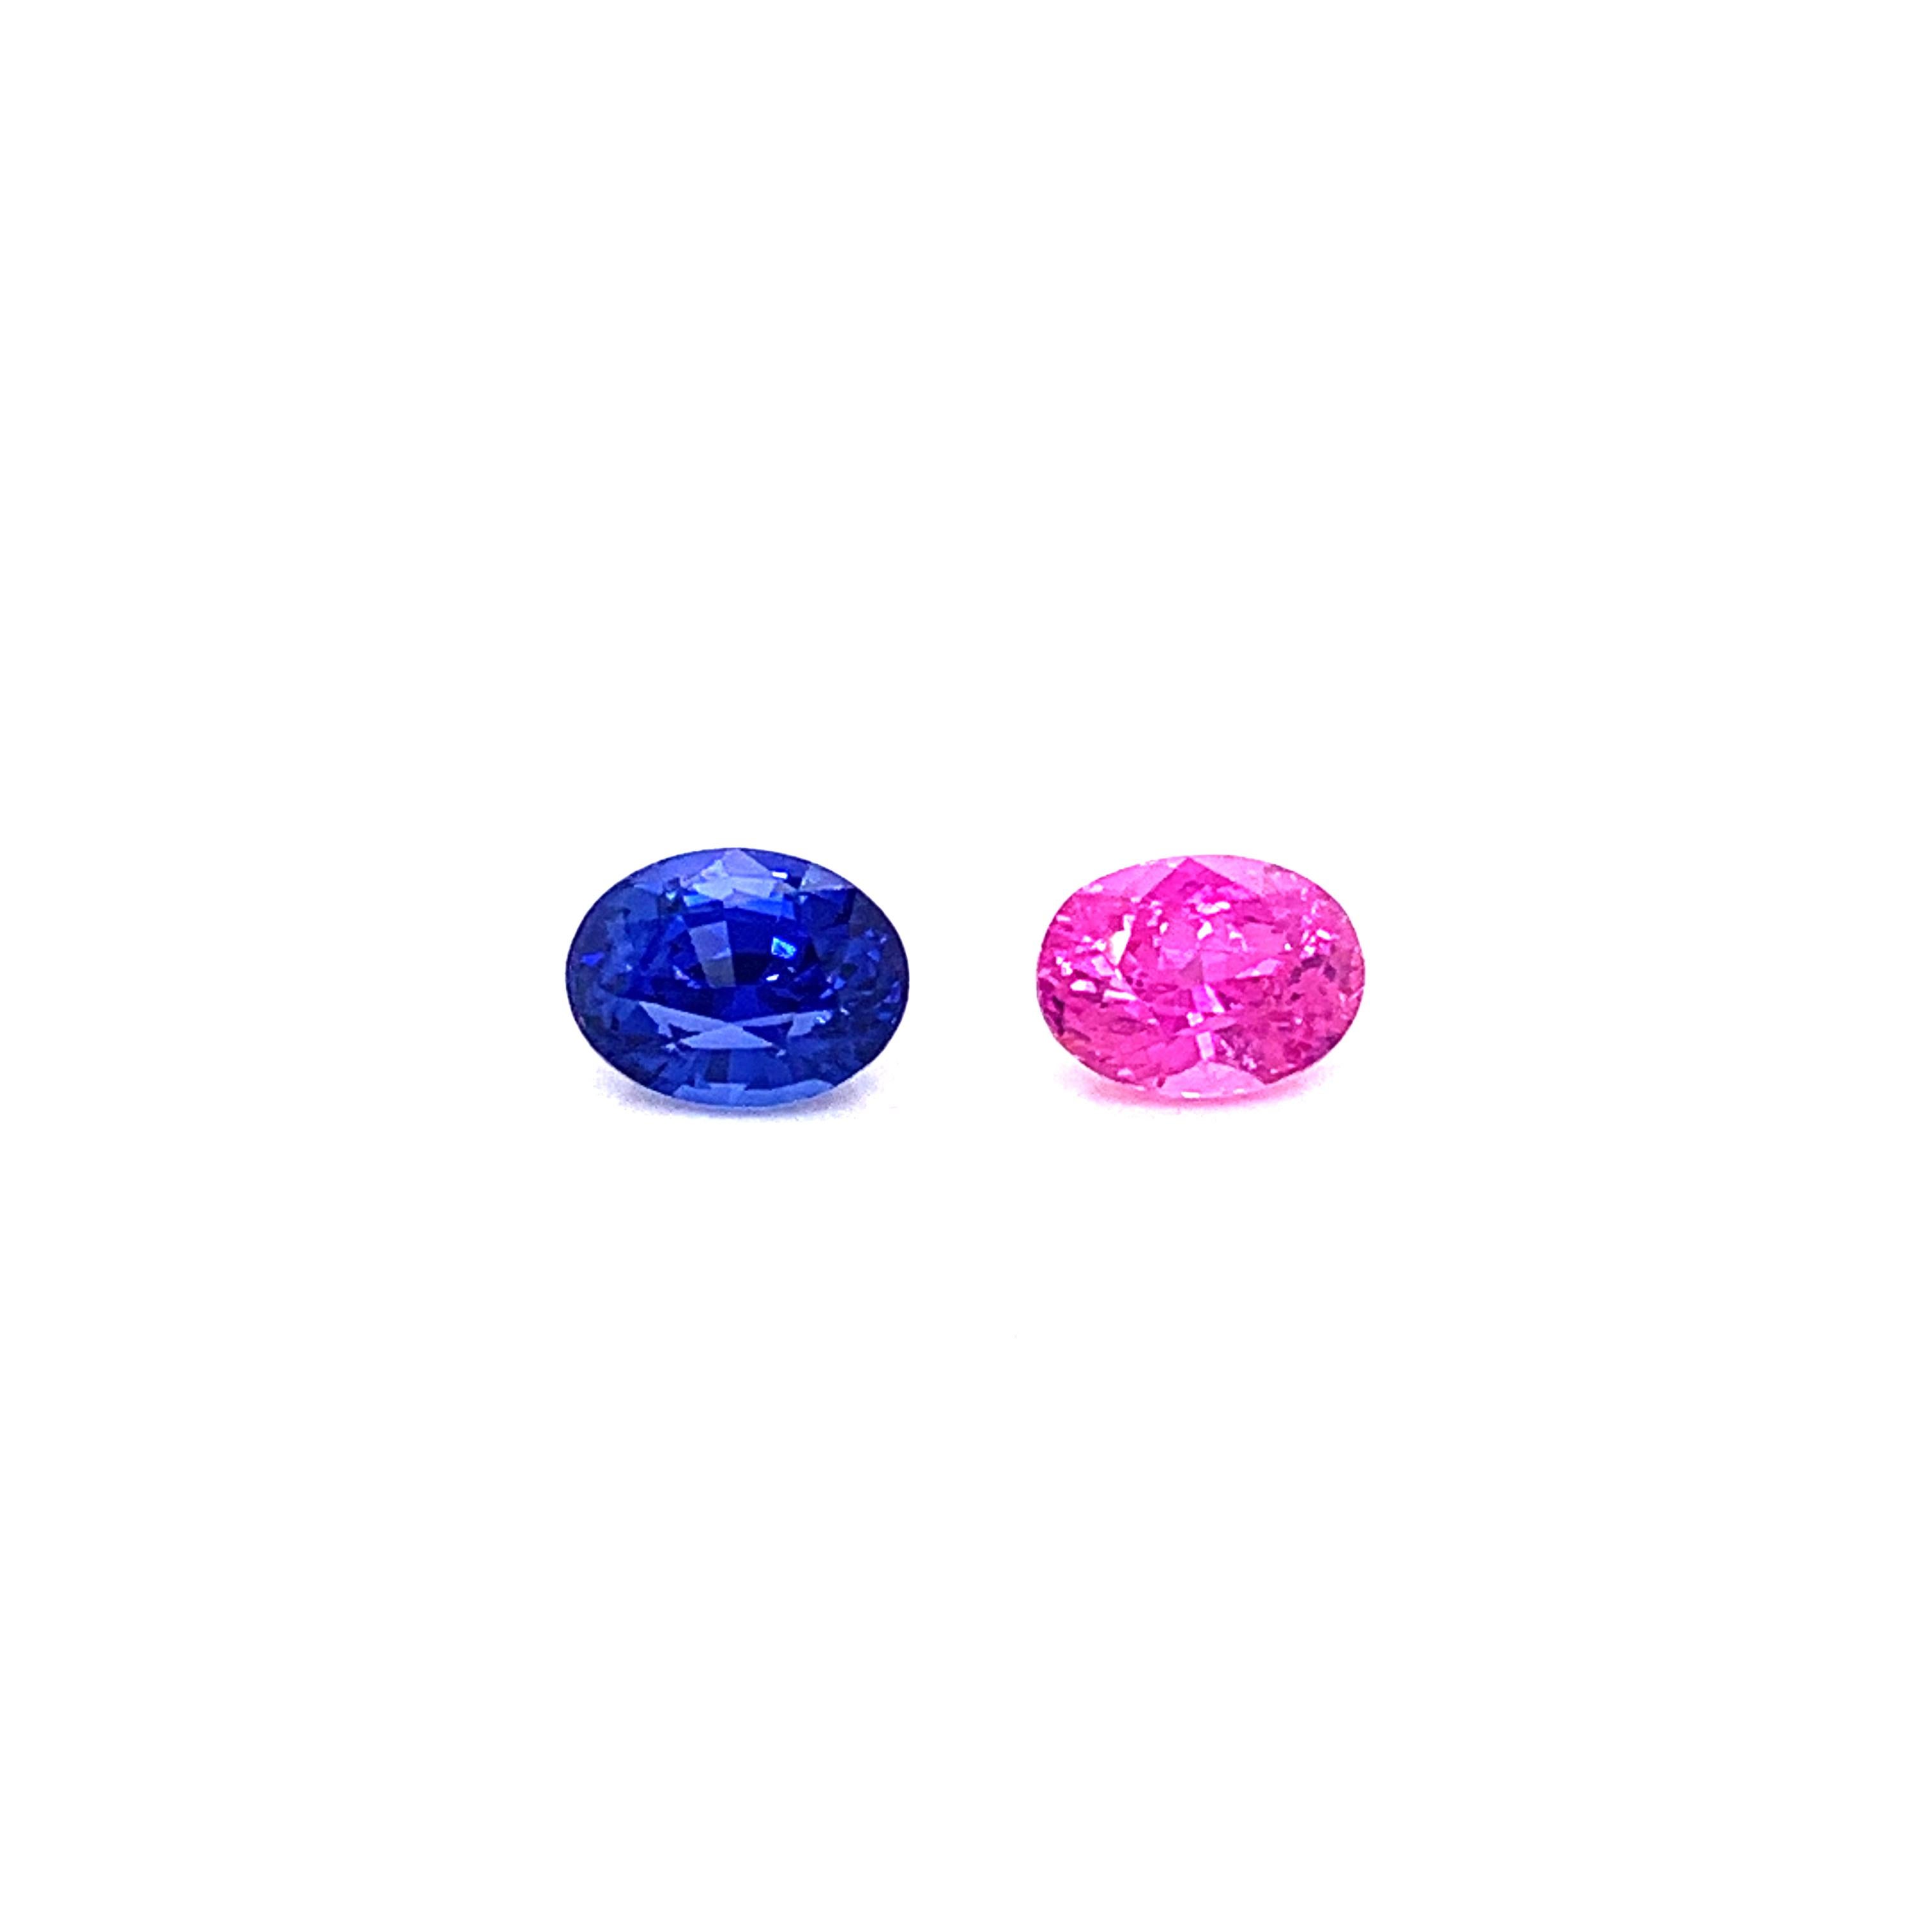 2.70 Carat Oval Shaped Blue and Pink Sapphire Pair:

A very beautiful and elegant pair, it features two natural pink and blue sapphires weighing a total of 2.70 carat. The sapphires have excellent cutting proportions, and possess extremely fine